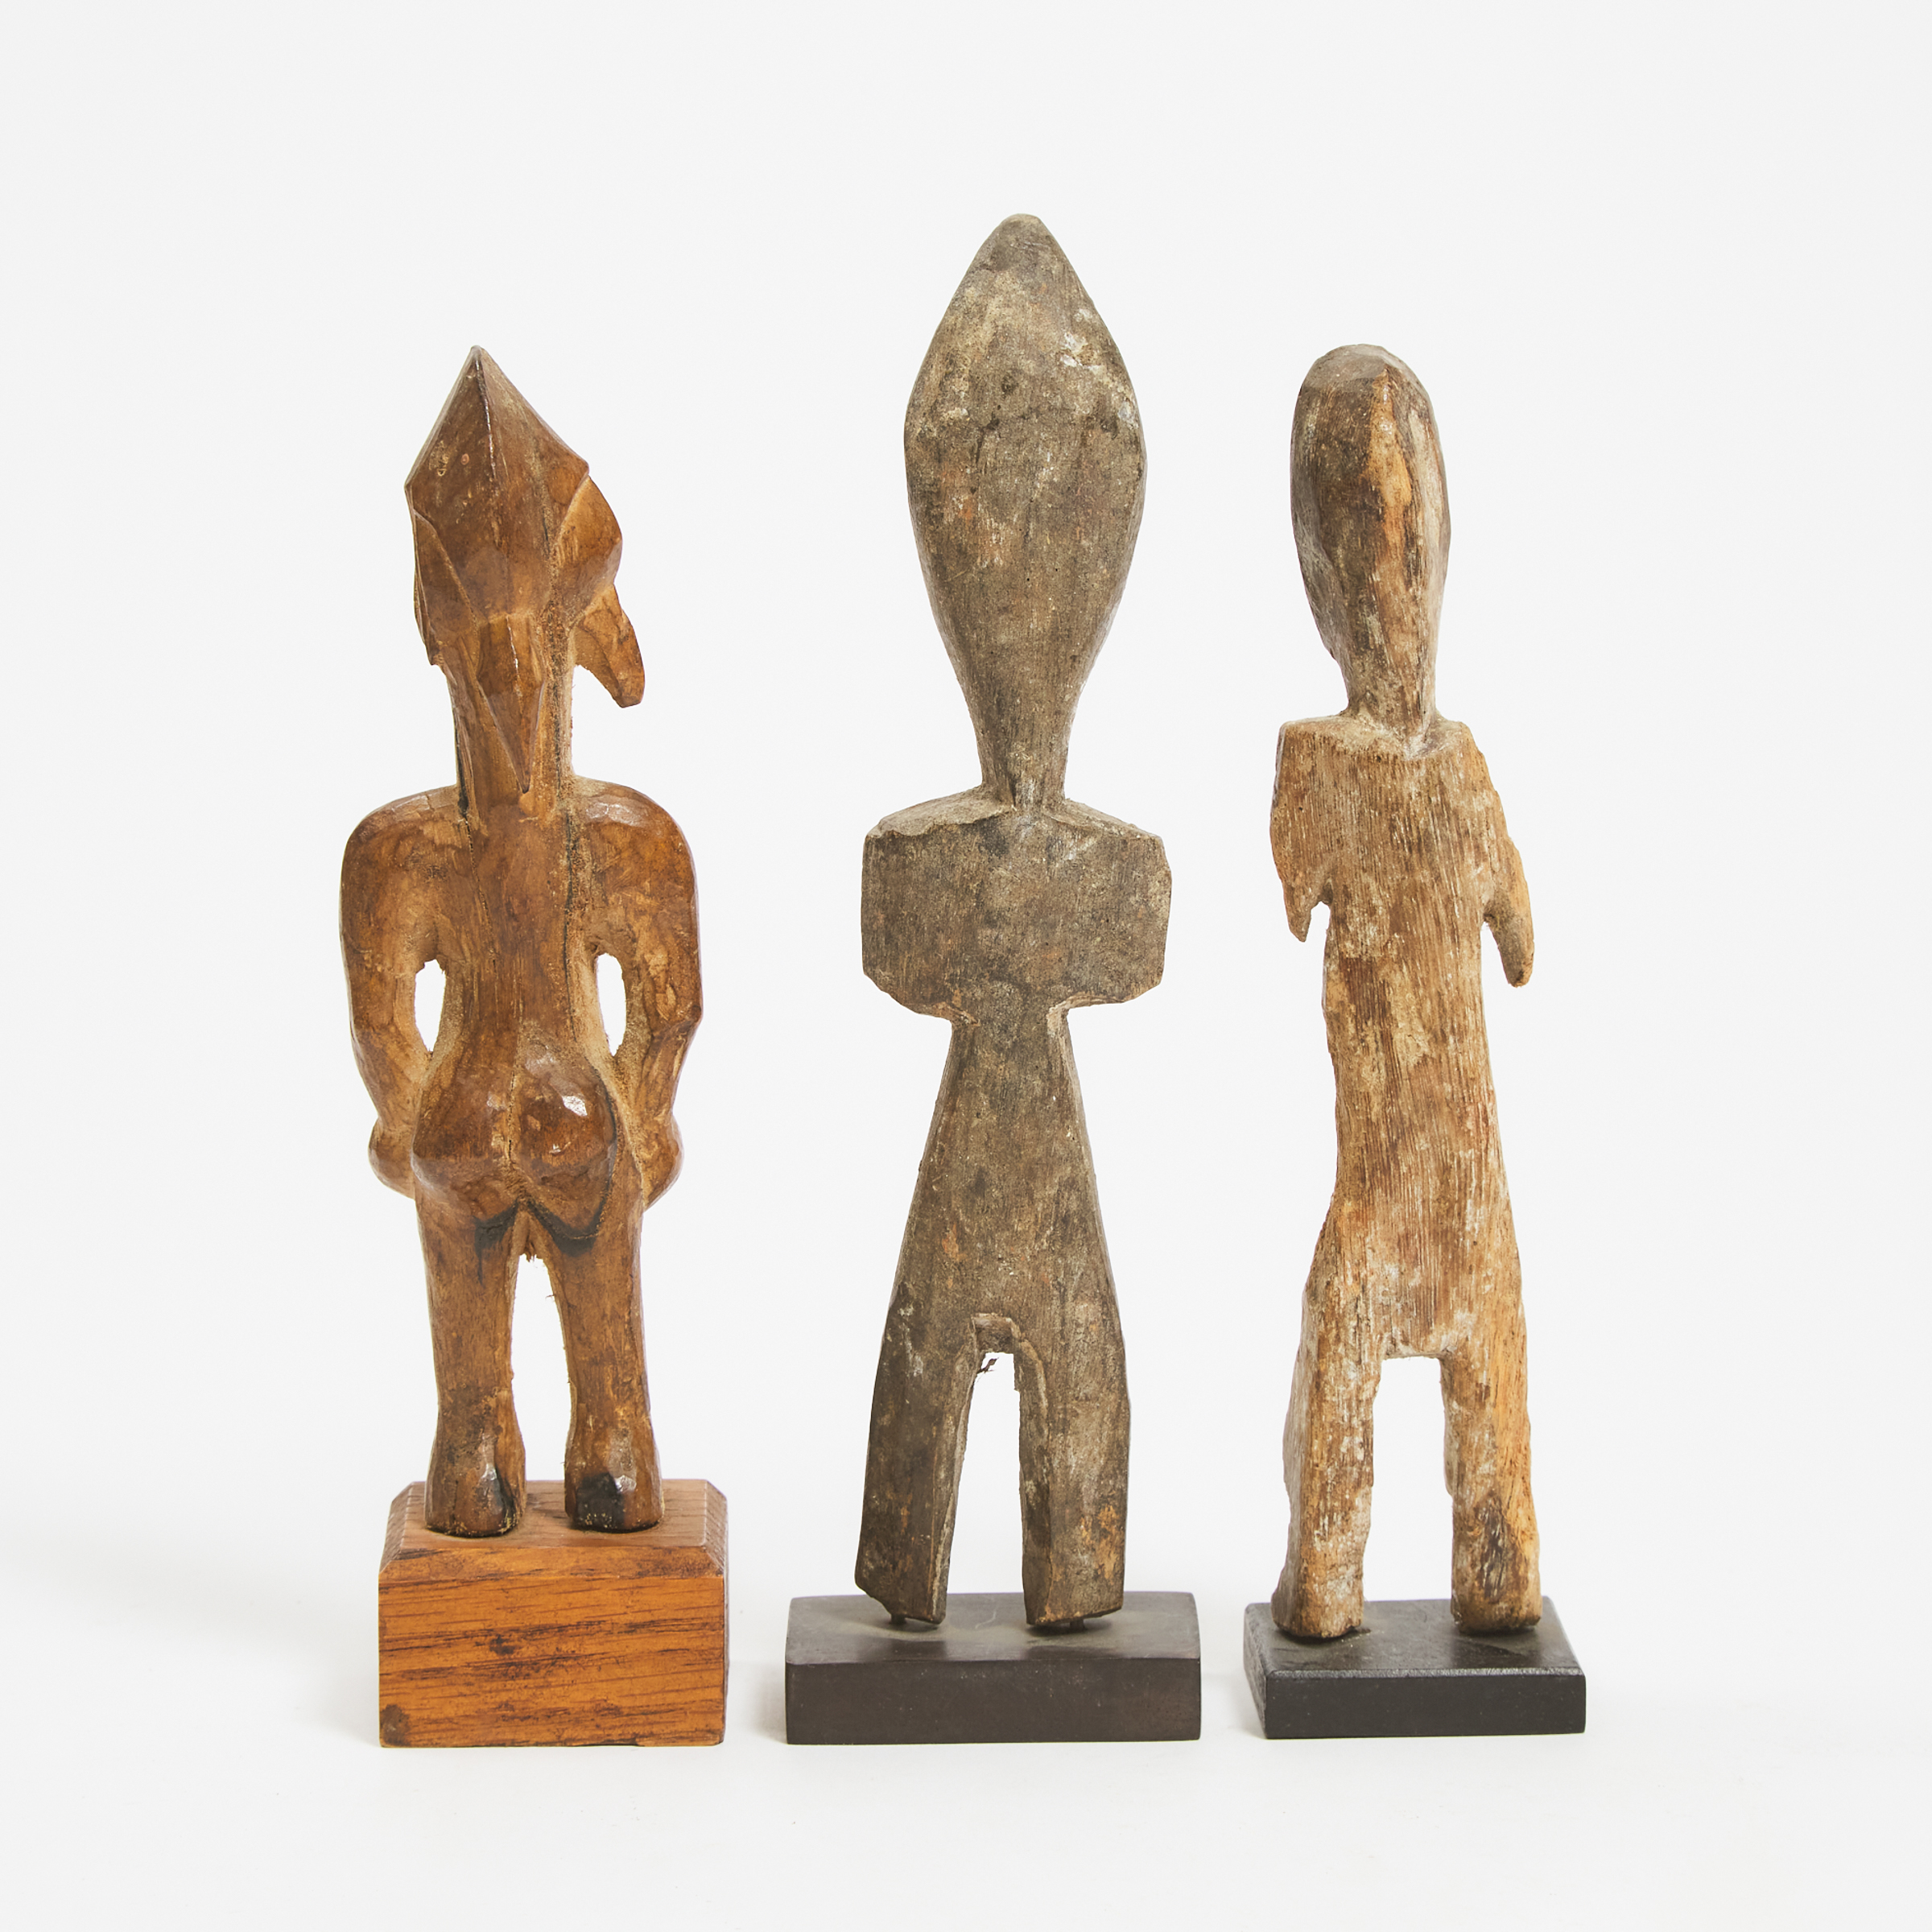 Senufo Female Figure, South Africa together with two unidentified African figures, 20th century, two possibly 19th century